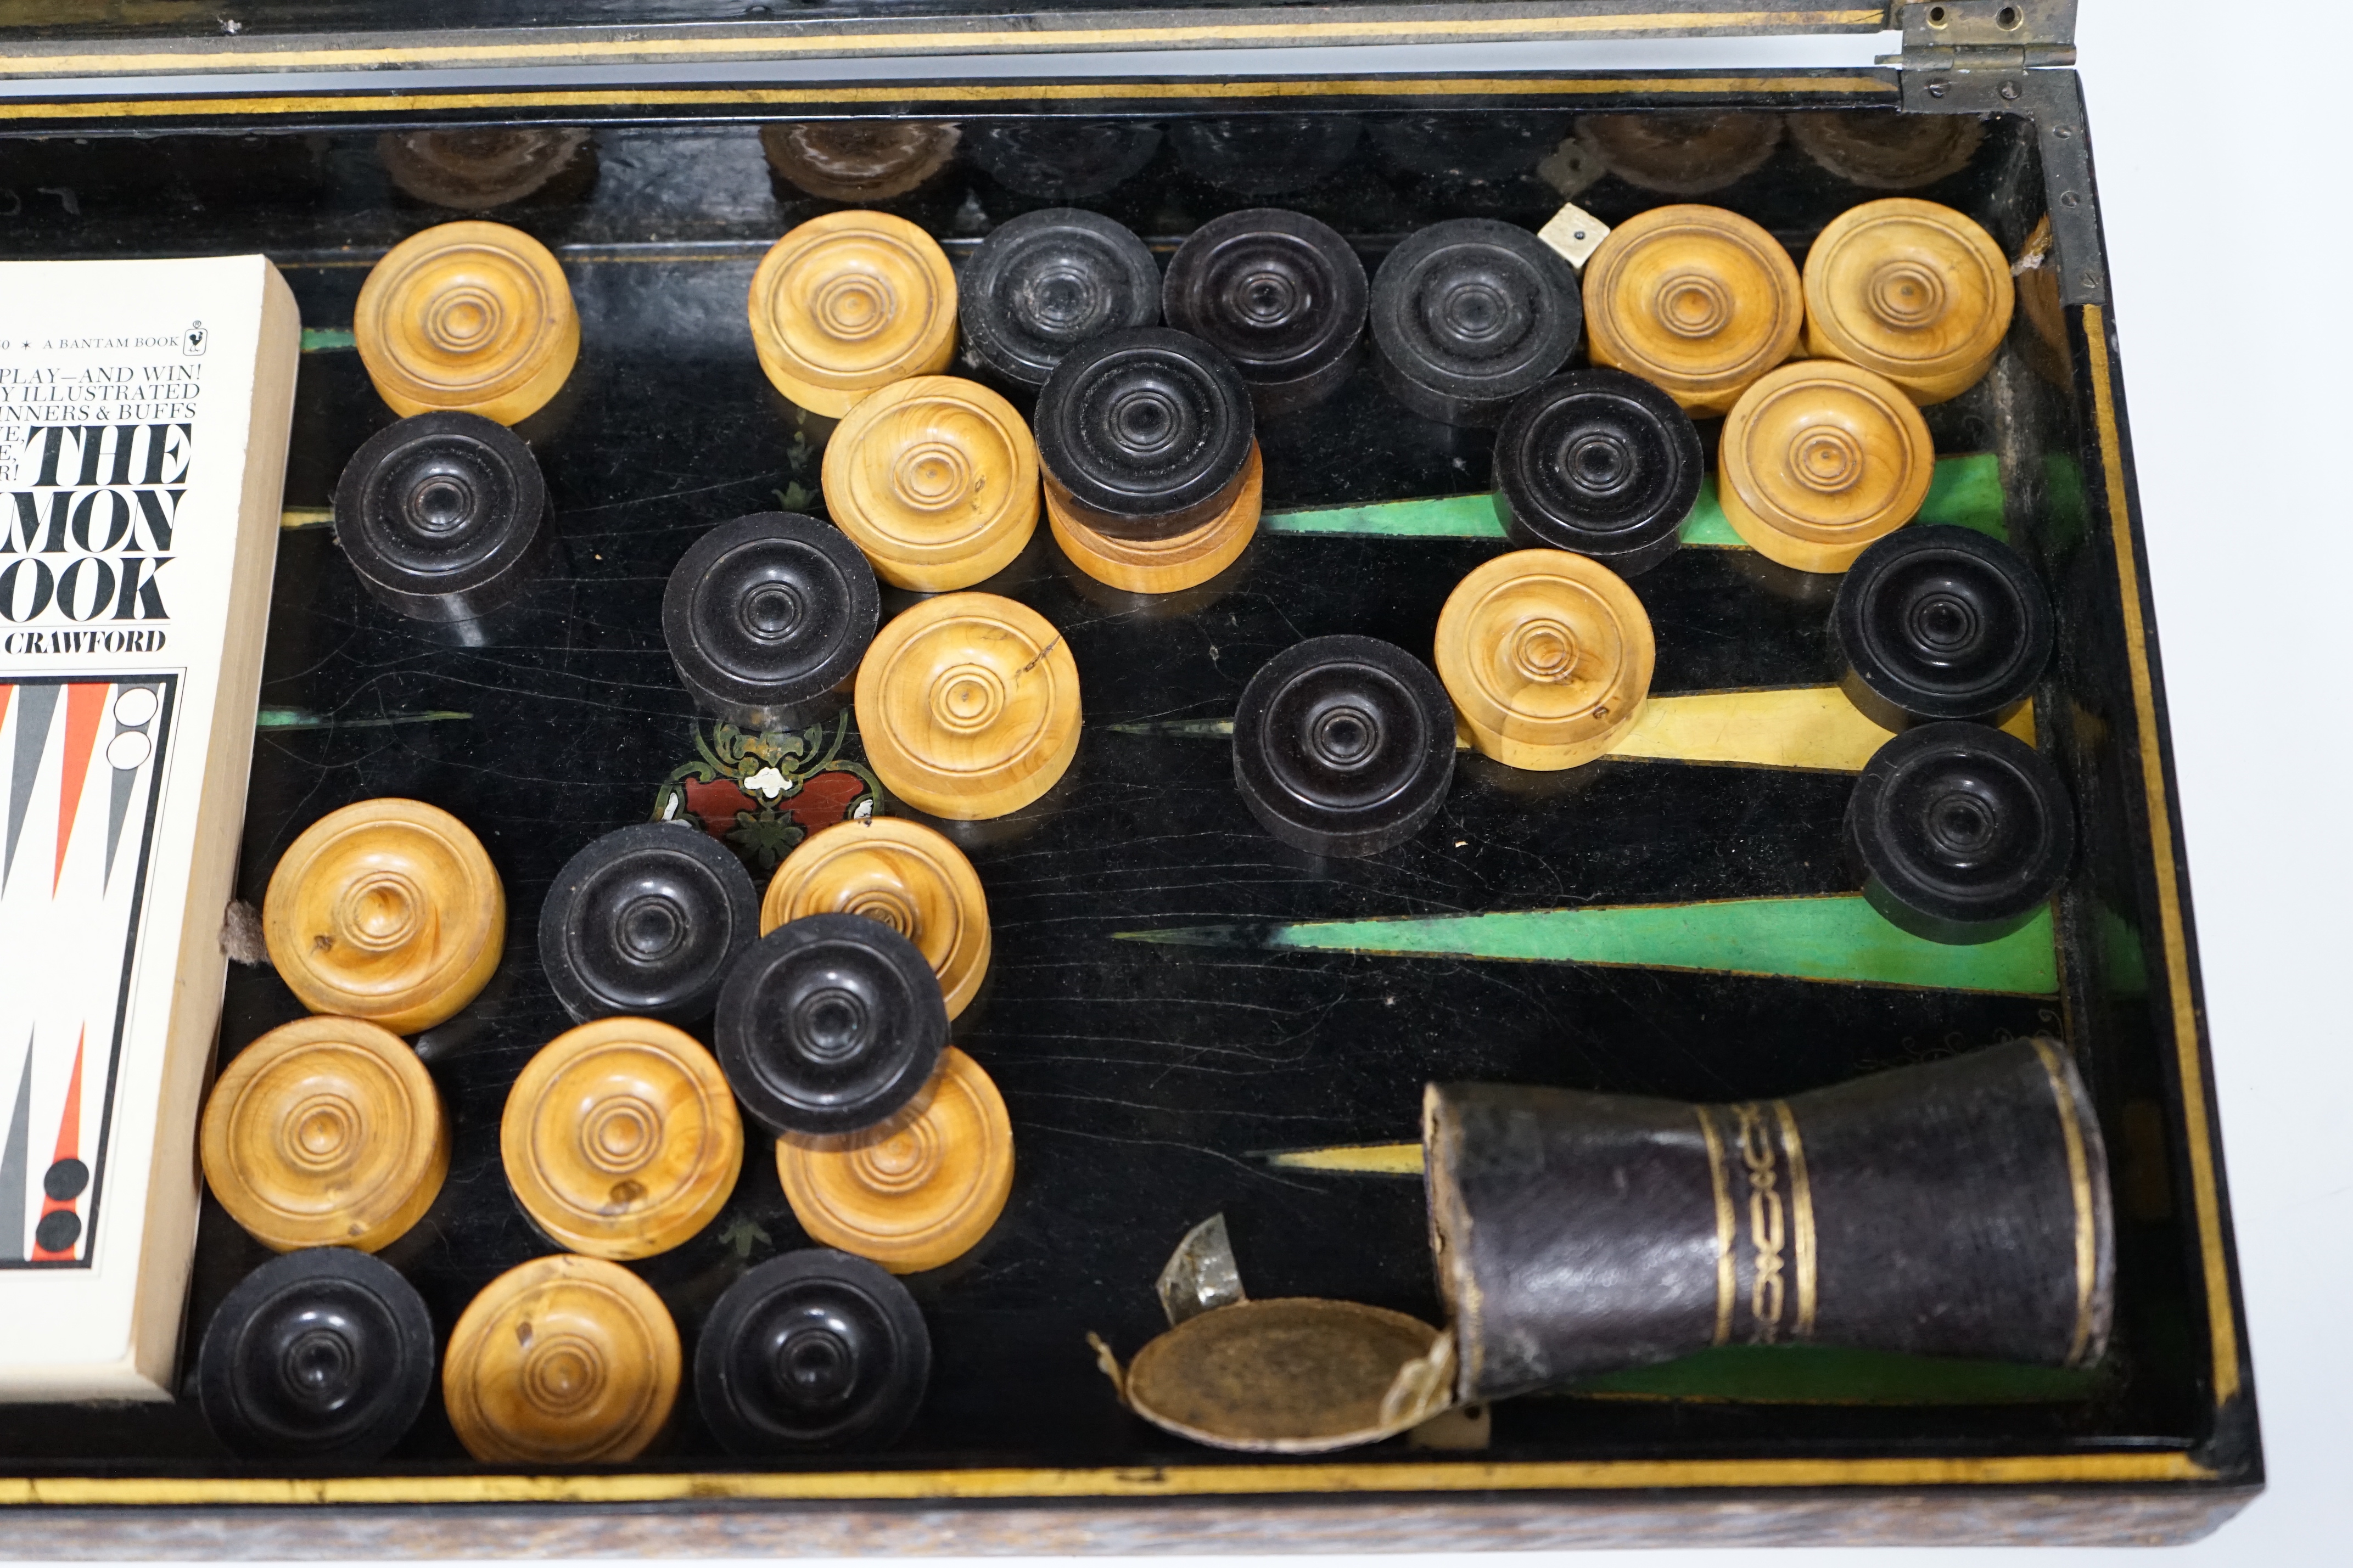 A 19th century papier maché folding games board for chess and backgammon, containing a wooden draughts set etc. with gilt decoration, 41 x 45cm unfolded